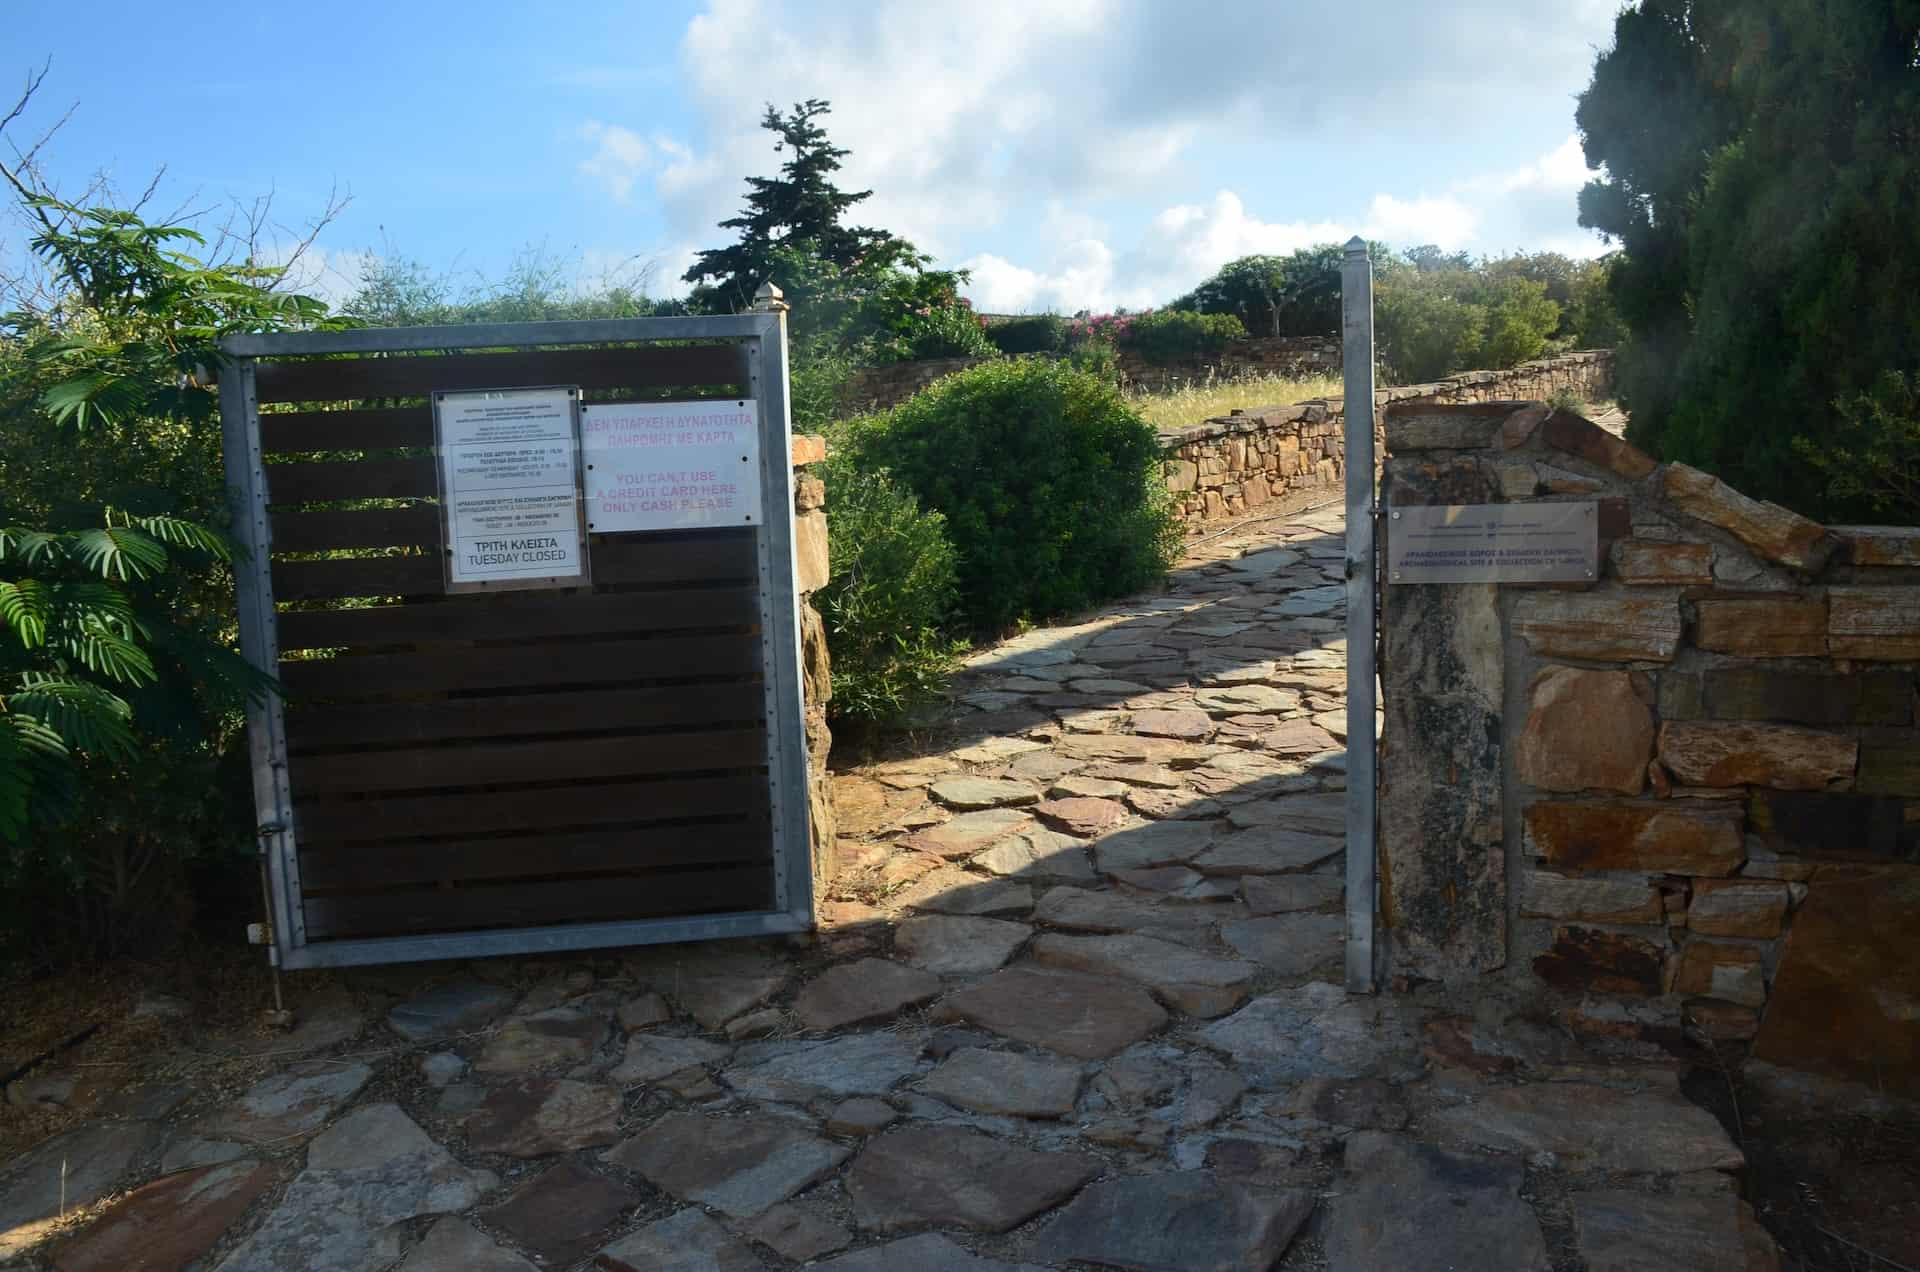 Entrance to the site